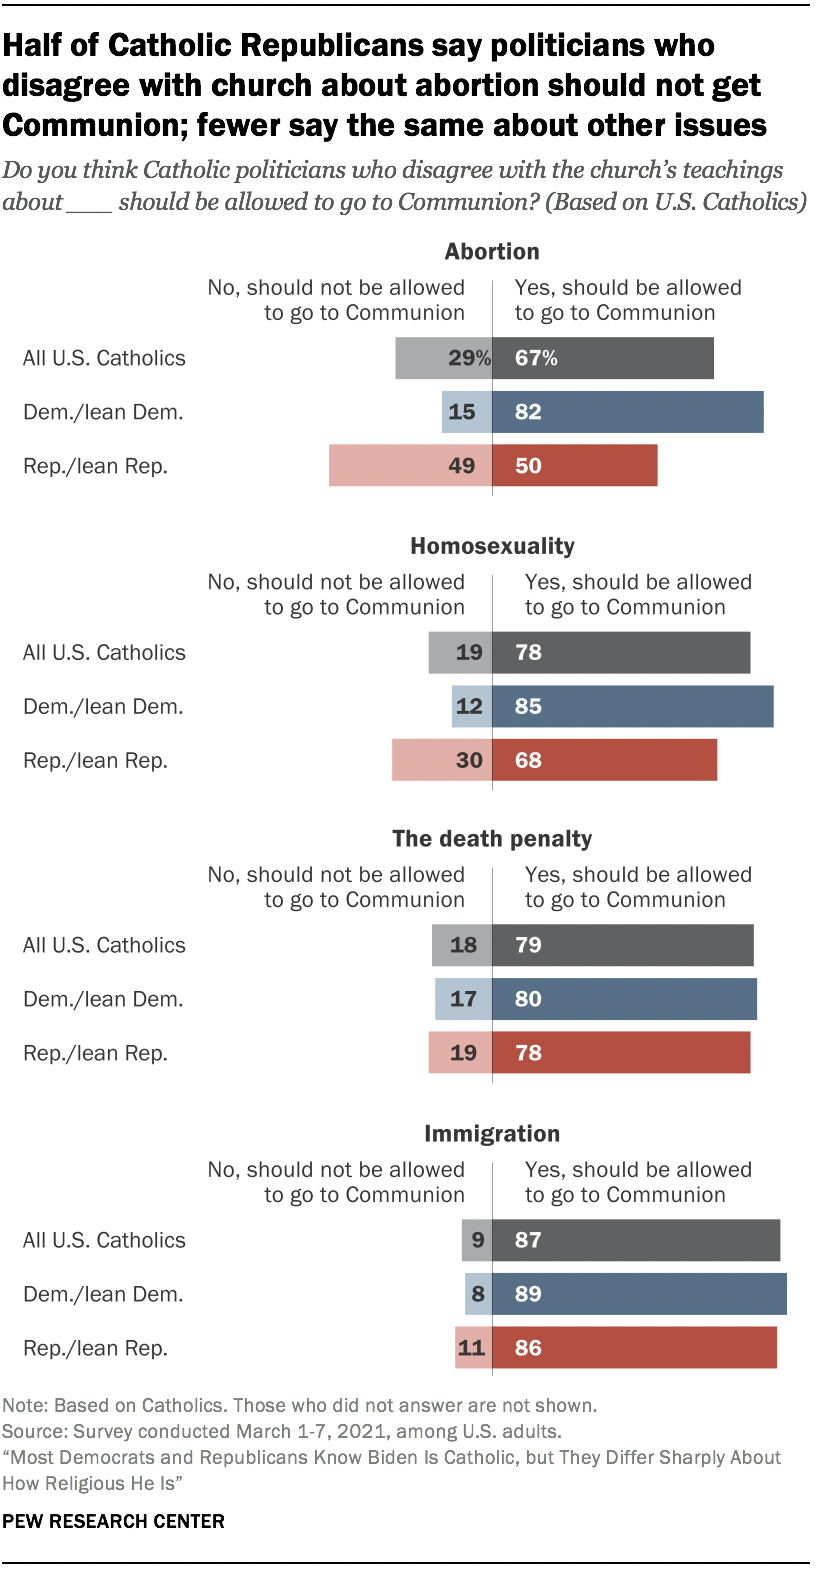 Half of Catholic Republicans say politicians who disagree with church about abortion should not get Communion; fewer say the same about other issues